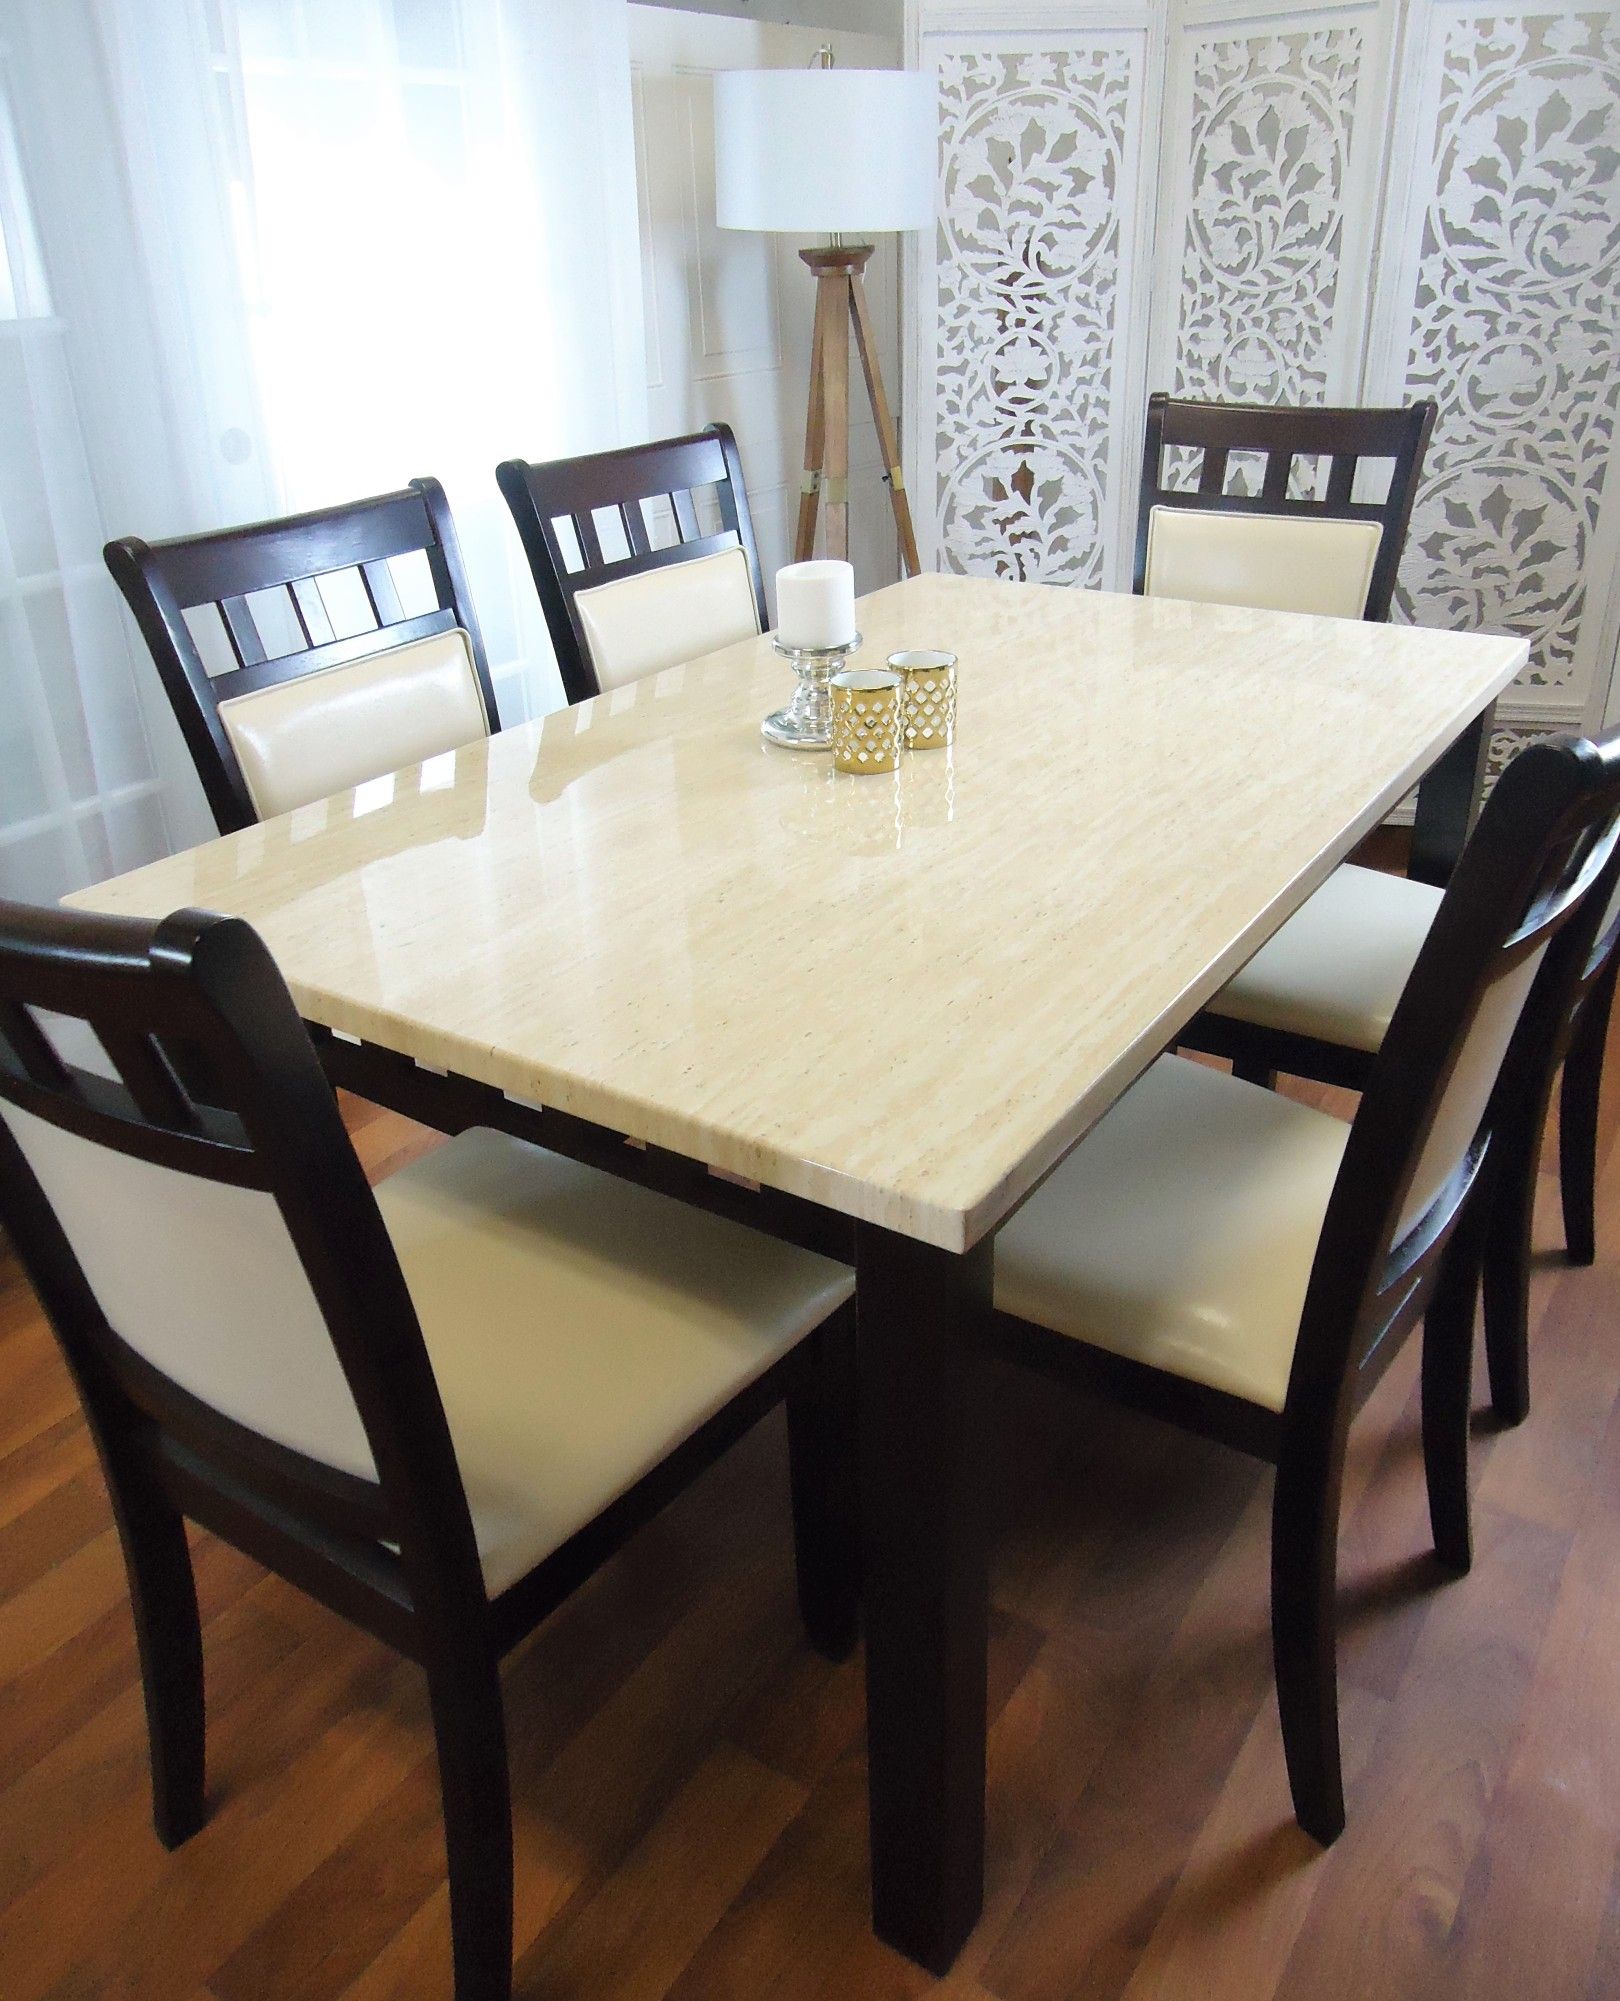 New Marble Top Dining Tables Dining Room Kitchen Table With Six Chairs